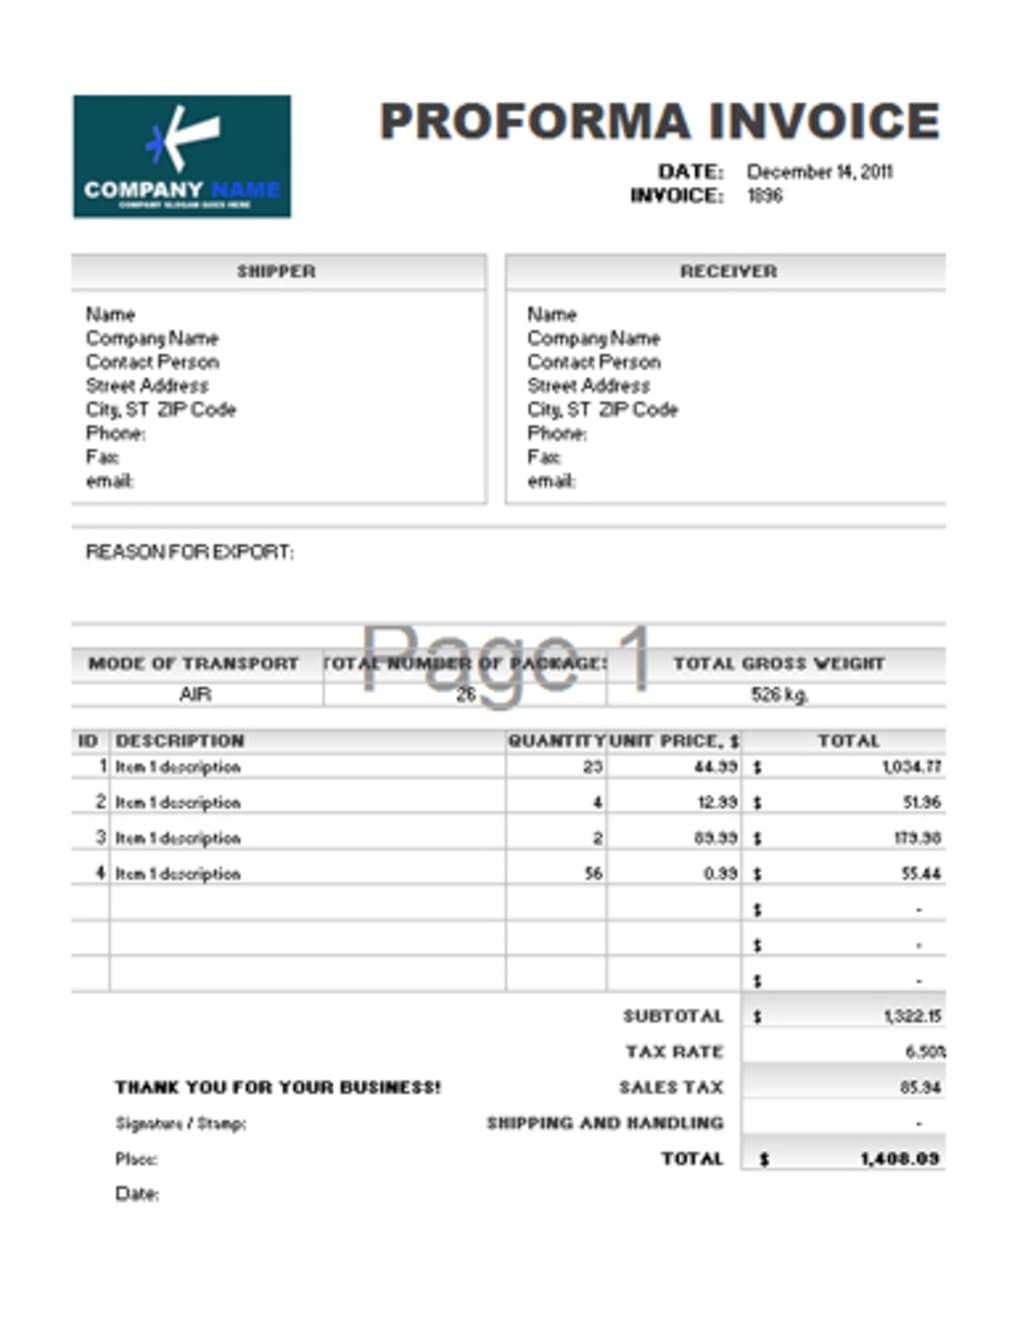 Proforma invoice template - Download Throughout Template Of Proforma Invoice